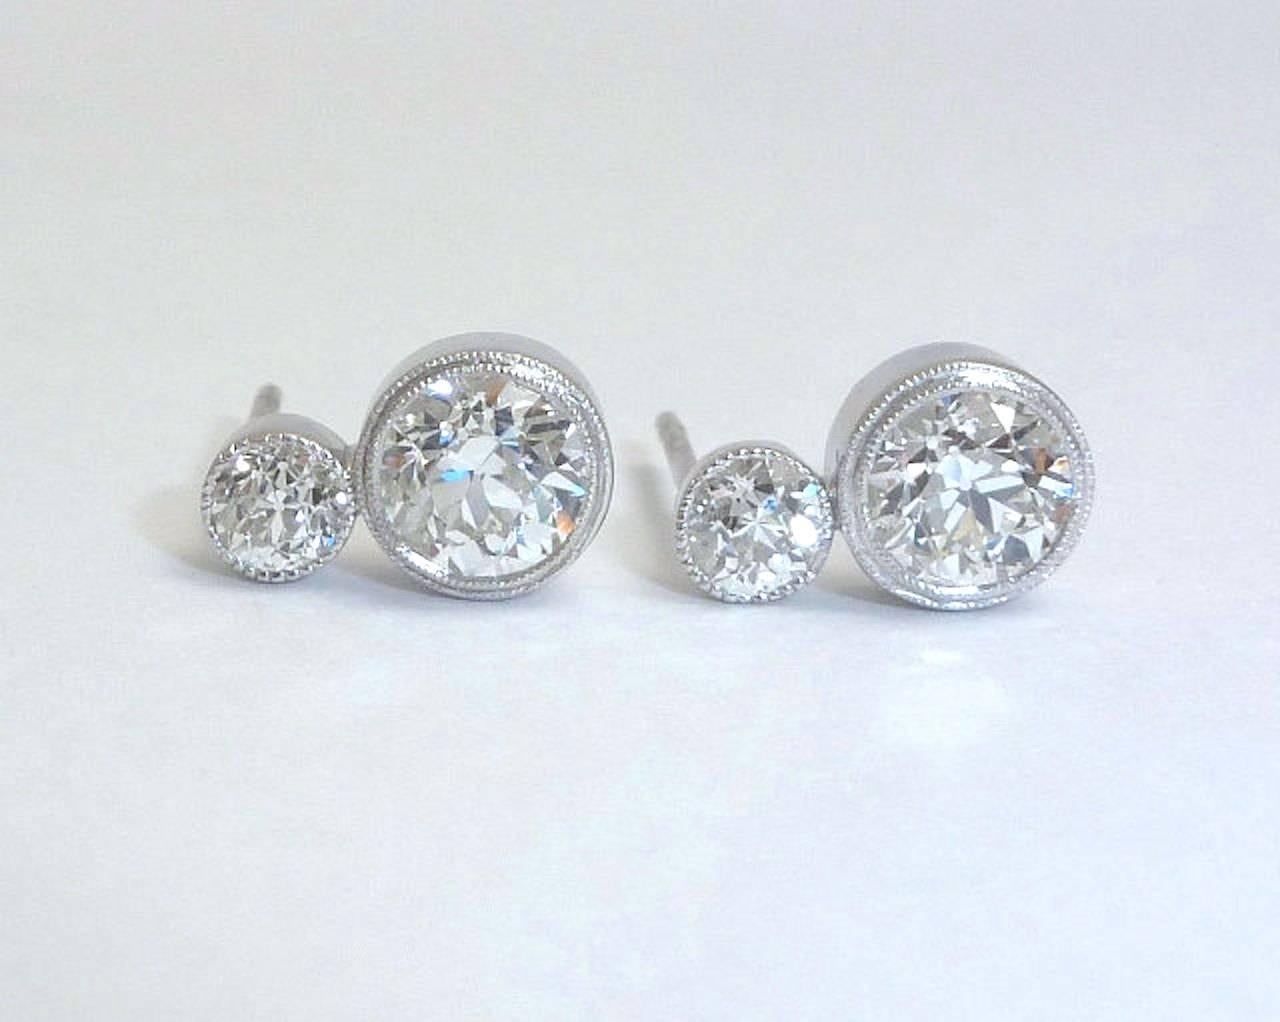 Beacon Hill Jewelers Presents:

A pair of handmade old European cut diamond stud earrings in luxurious platinum. Set with four perfectly matched old European cut diamonds, these earrings are entirely handmade by us in our Boston Massachusetts